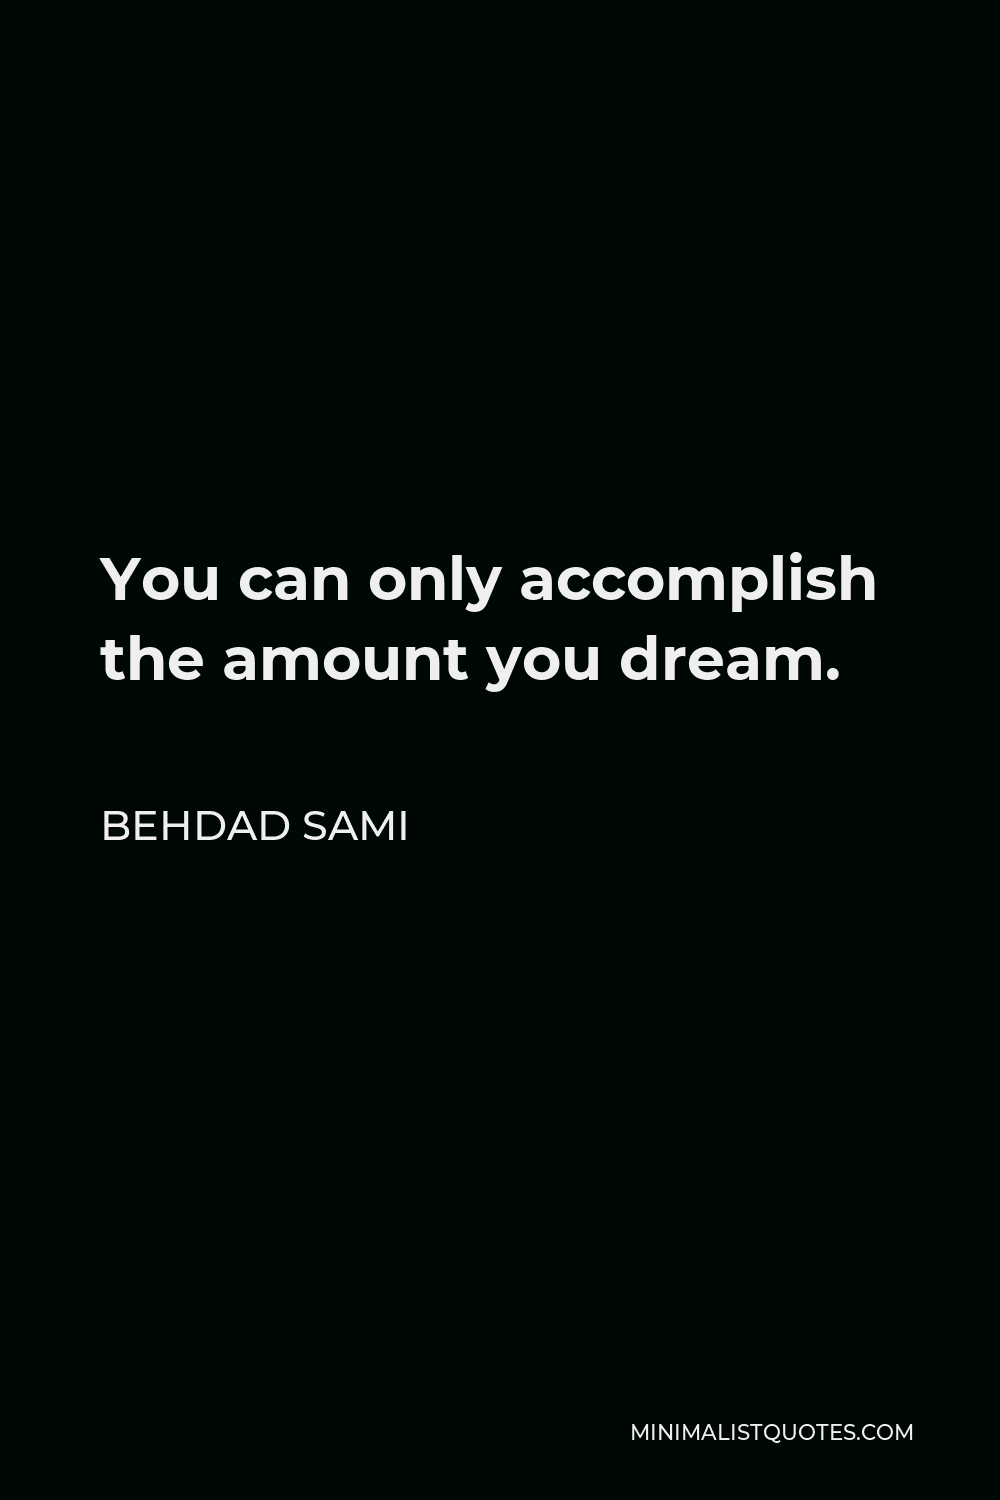 Behdad Sami Quote - You can only accomplish the amount you dream.